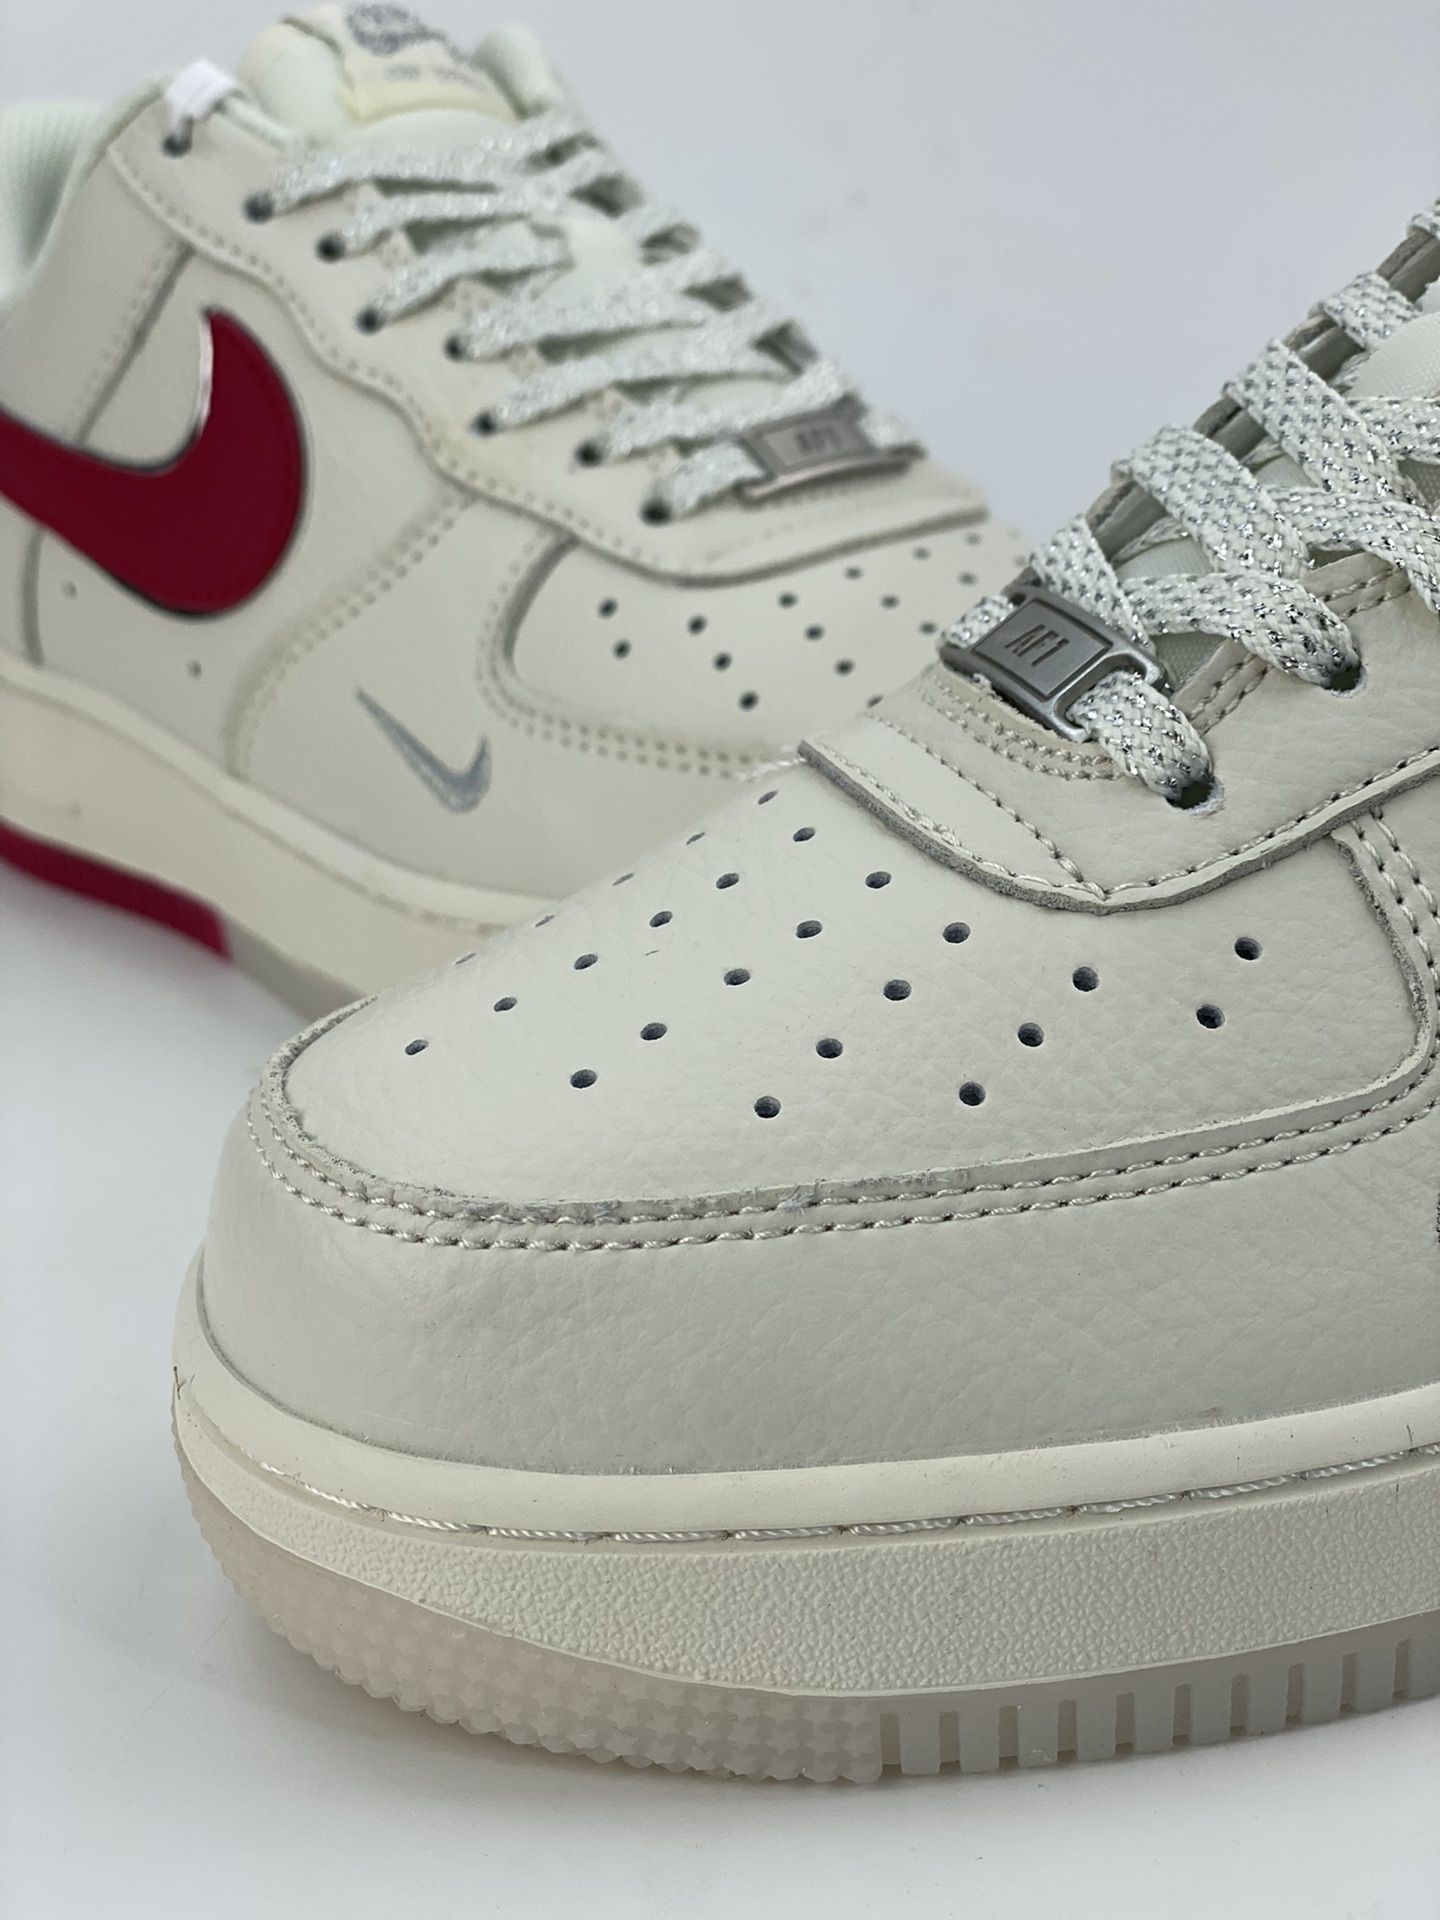 Nike Air Force 1 Low 07 Five Stripes Beige White Red BS9055-732